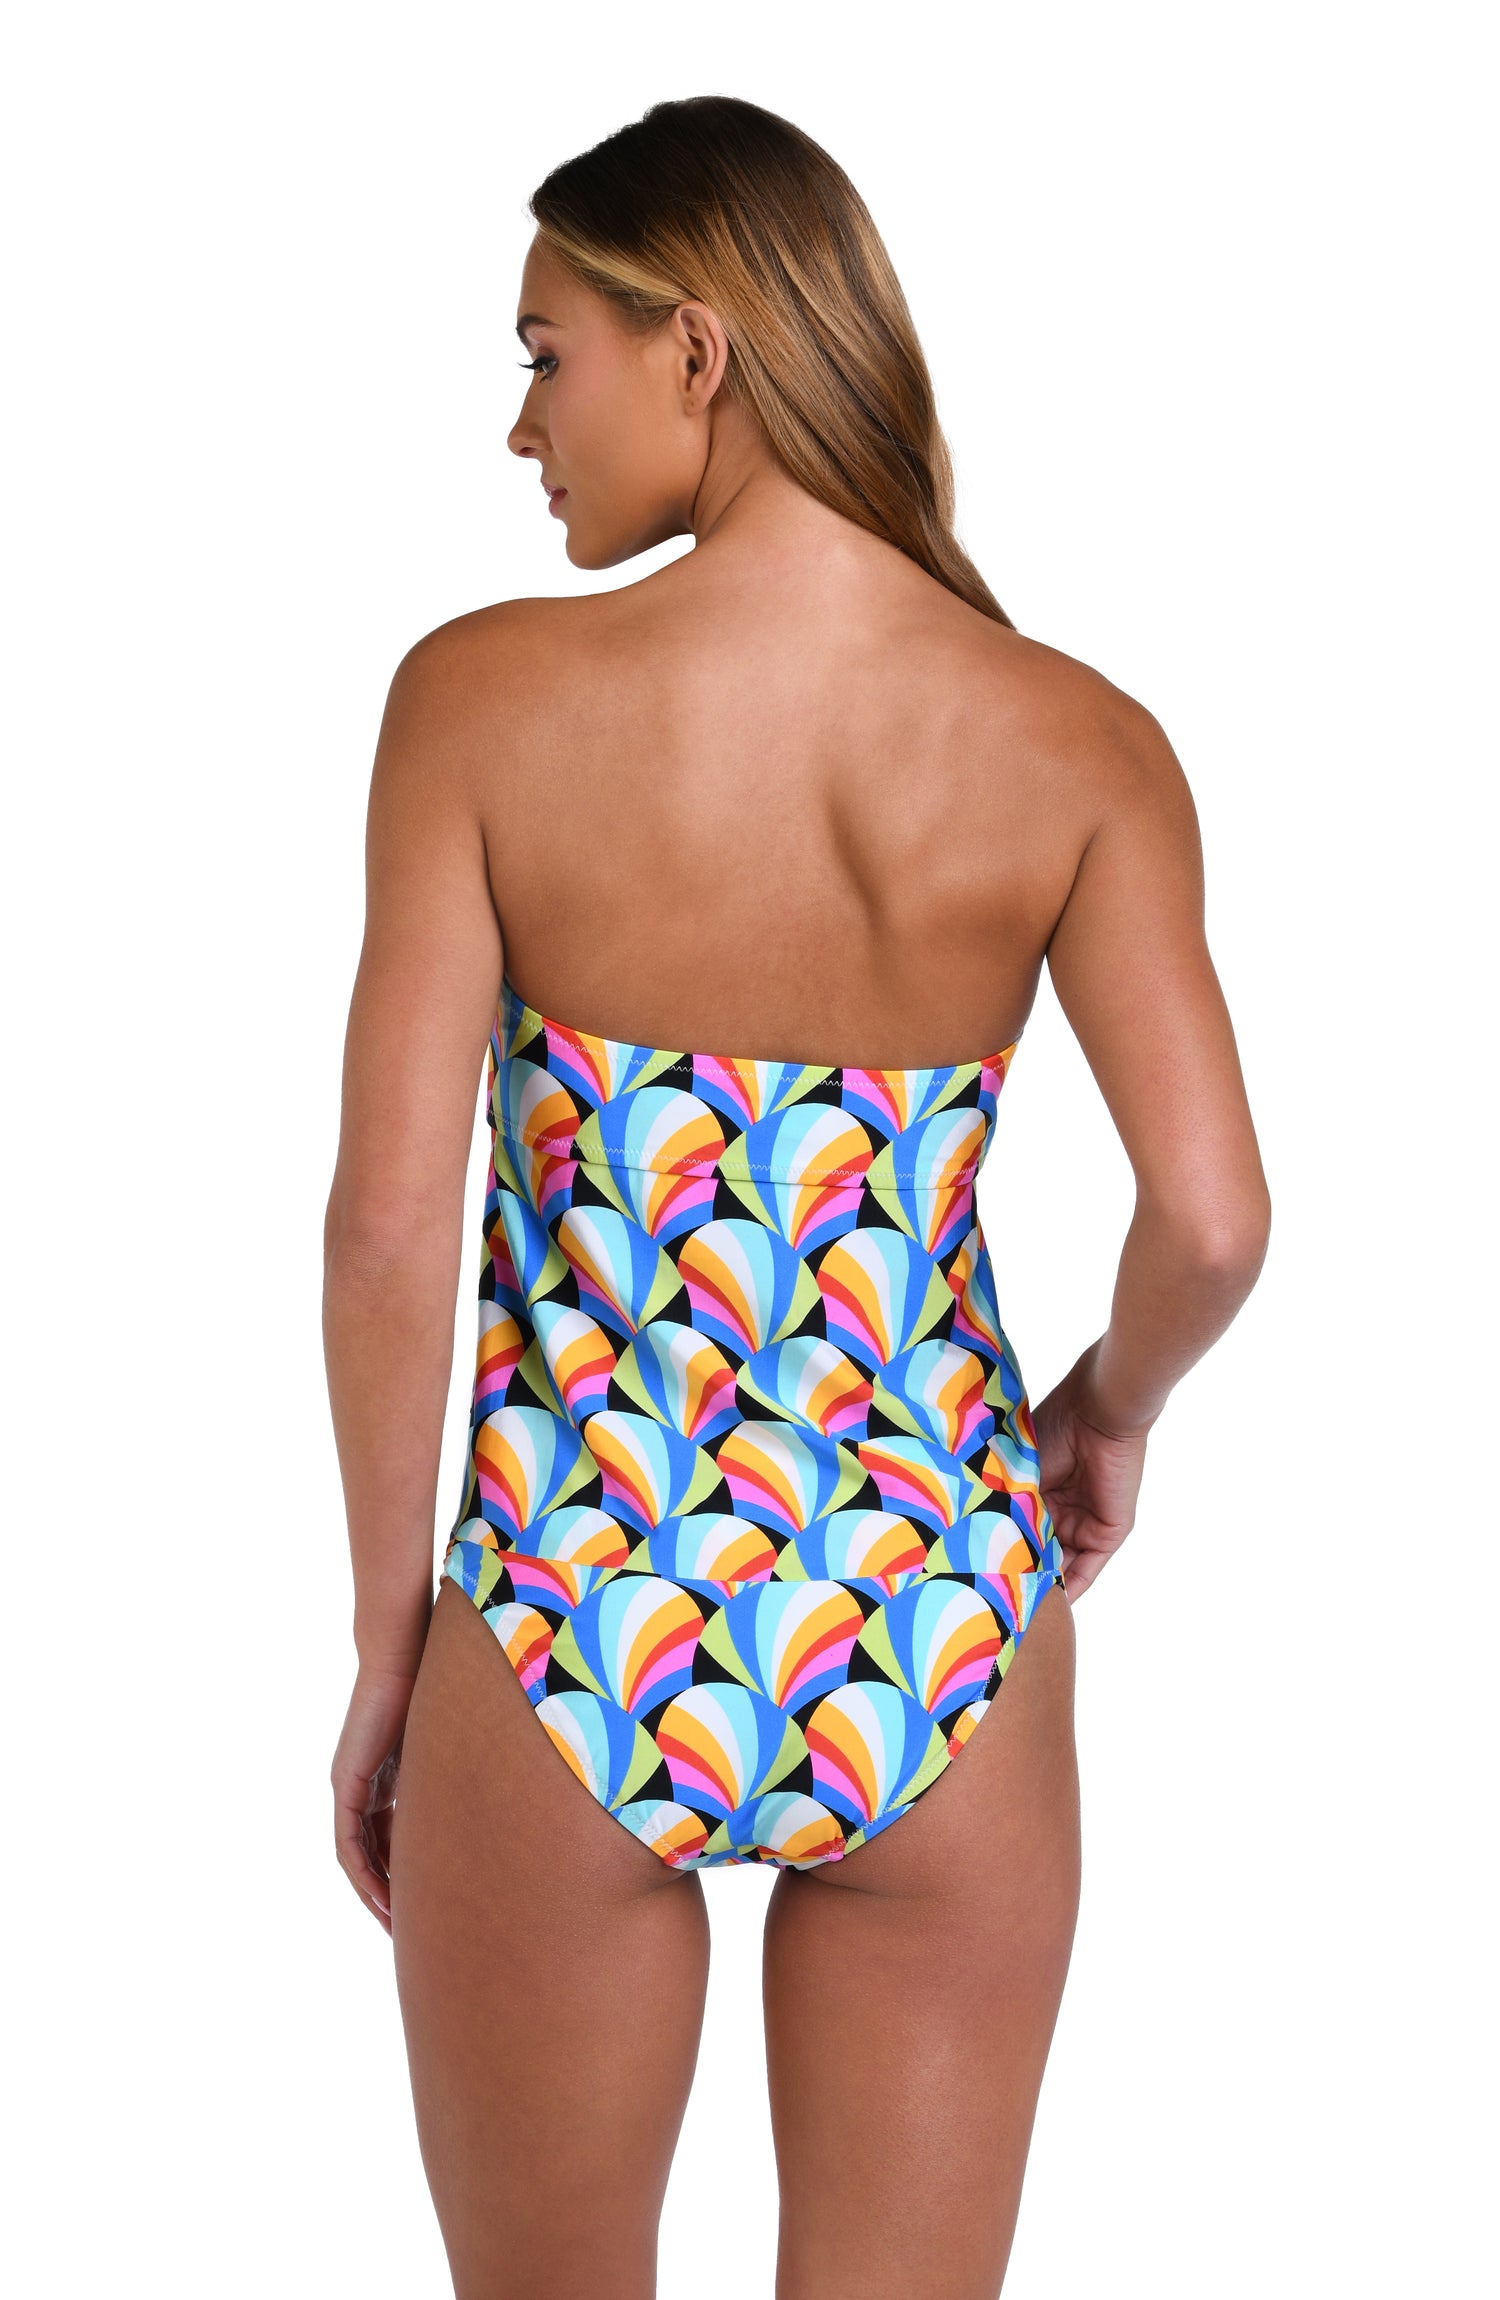 Model is wearing a pink, blue, yellow, and orange multicolored bandeau tankini top on a geometric patterned black background.